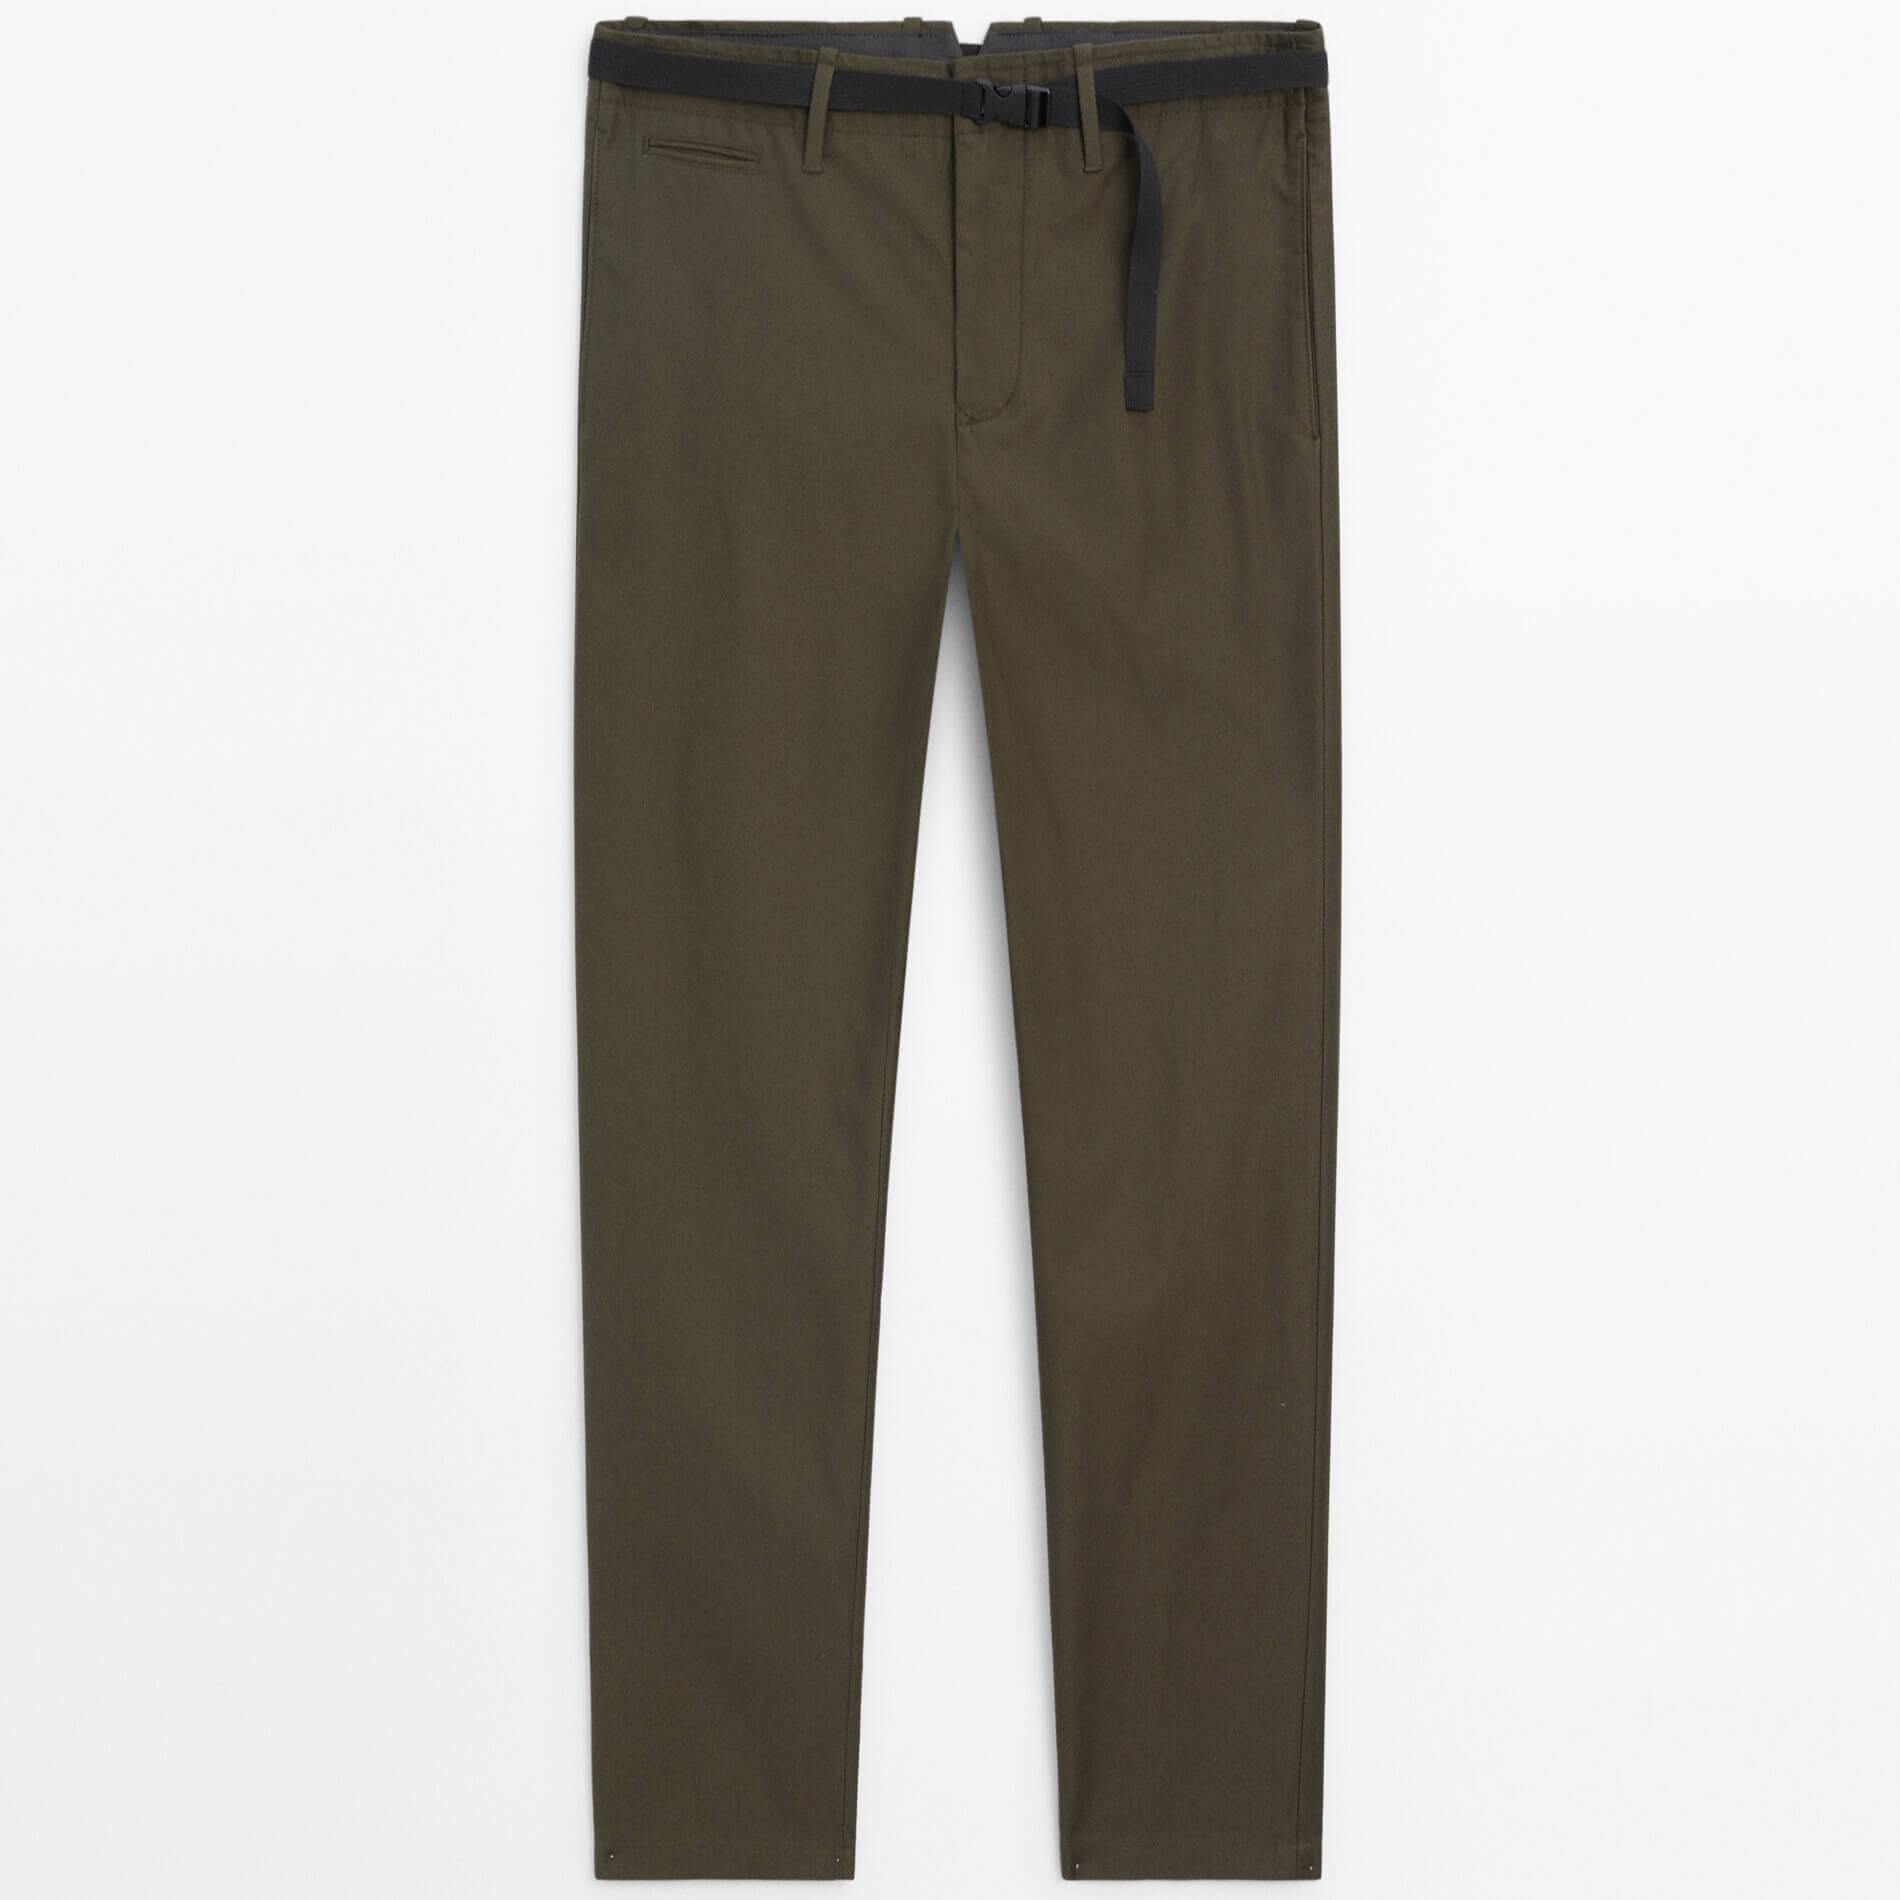 Брюки Massimo Dutti Relaxed Fit Belted Chino, хаки фото